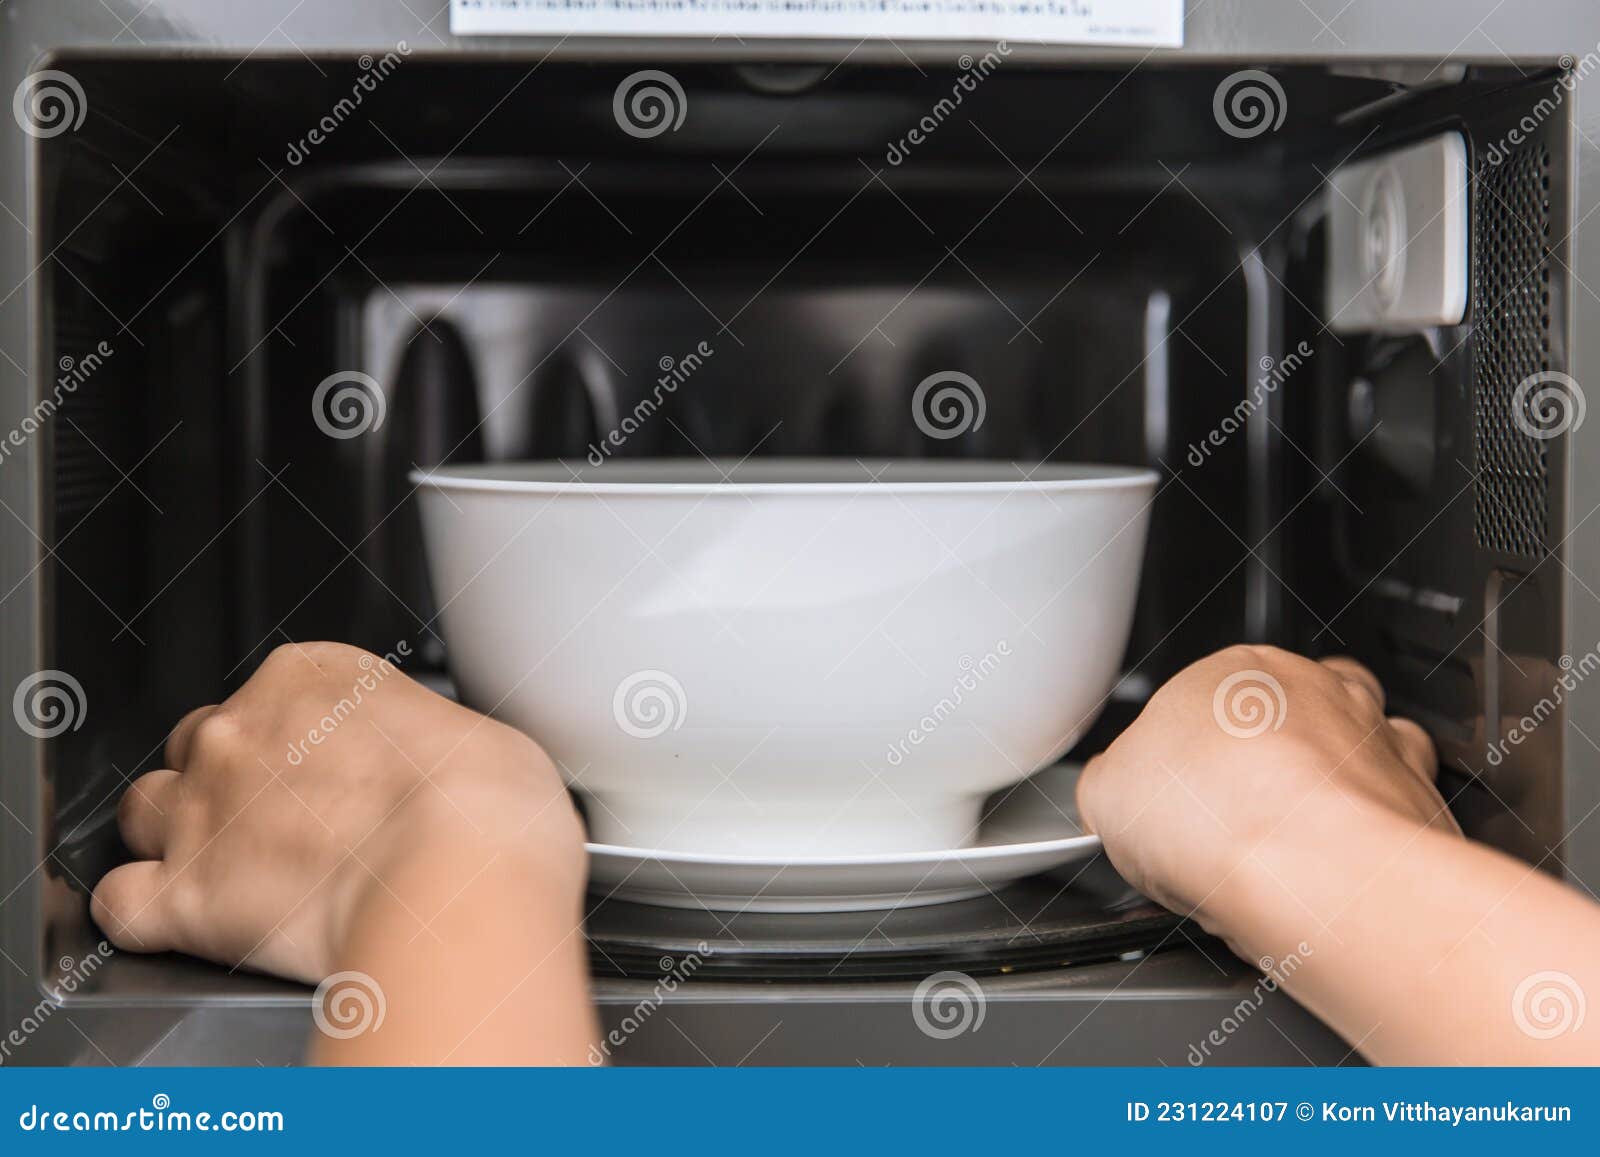 Heating Food in a Microwave Oven Stock Photo - Image of kitchen, door:  236057510